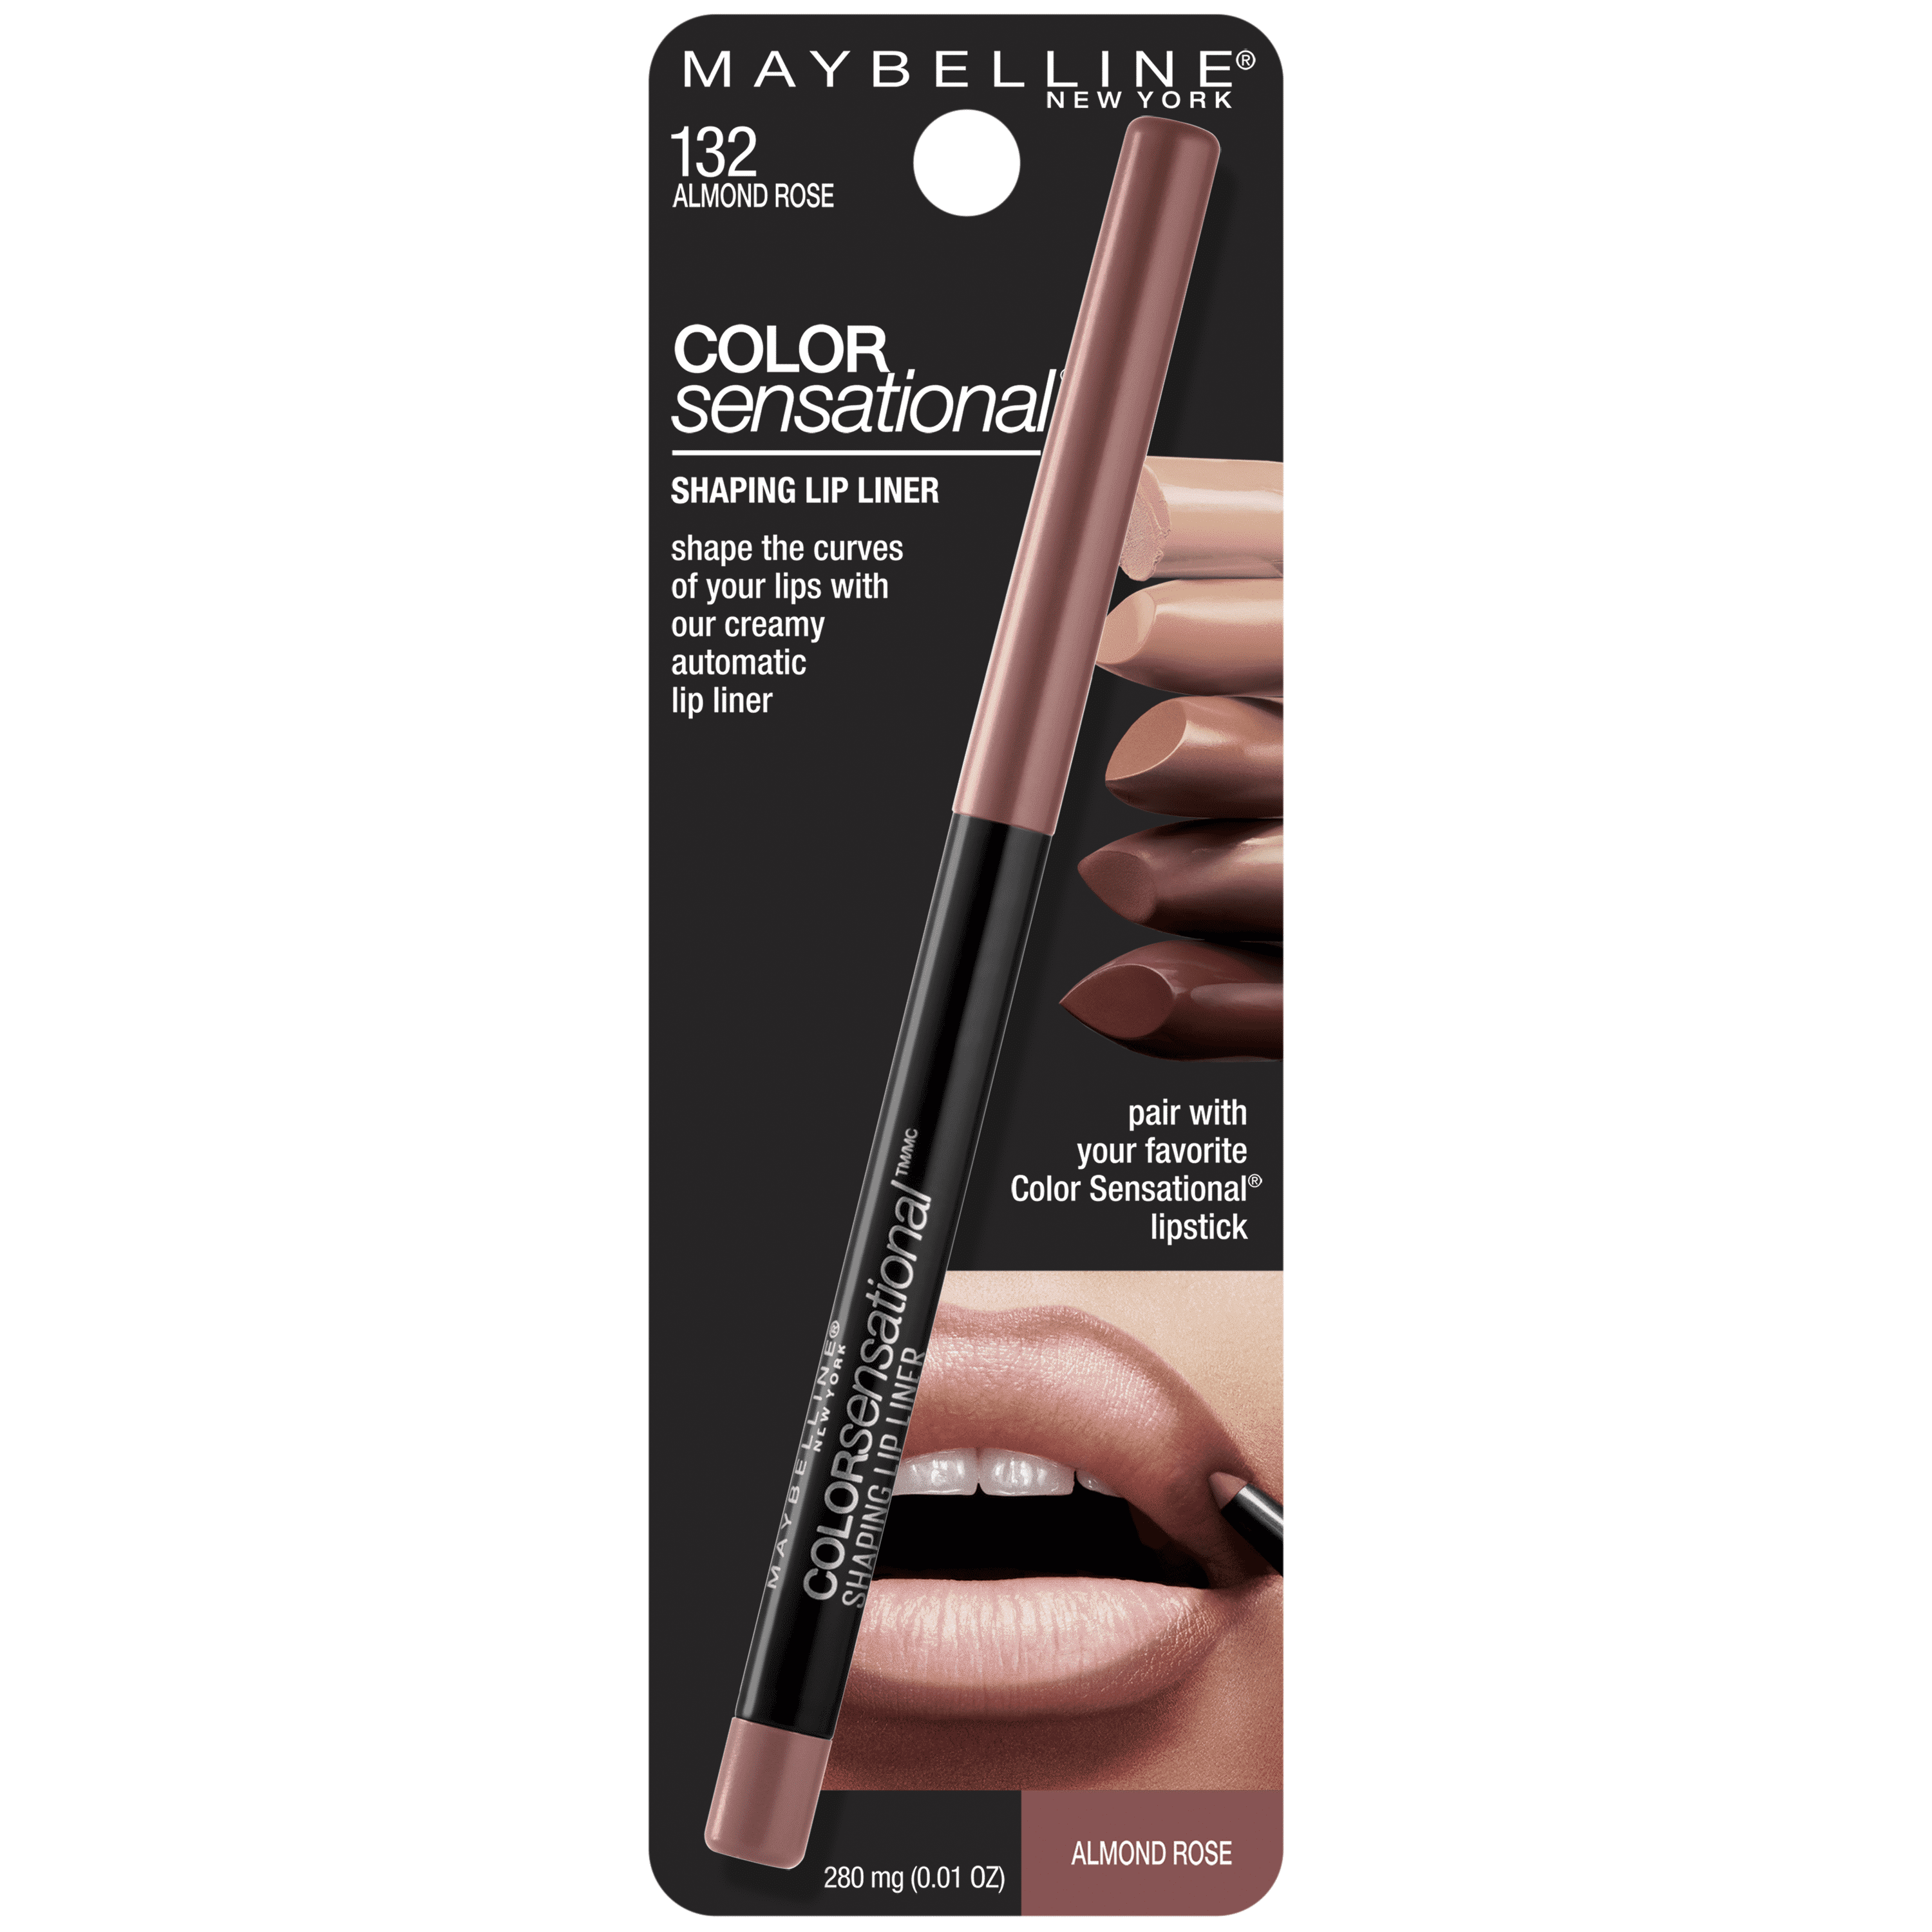 Maybelline Color Sensational Shaping Lip Liner Makeup, Raw Chocolate, 0.01  oz.